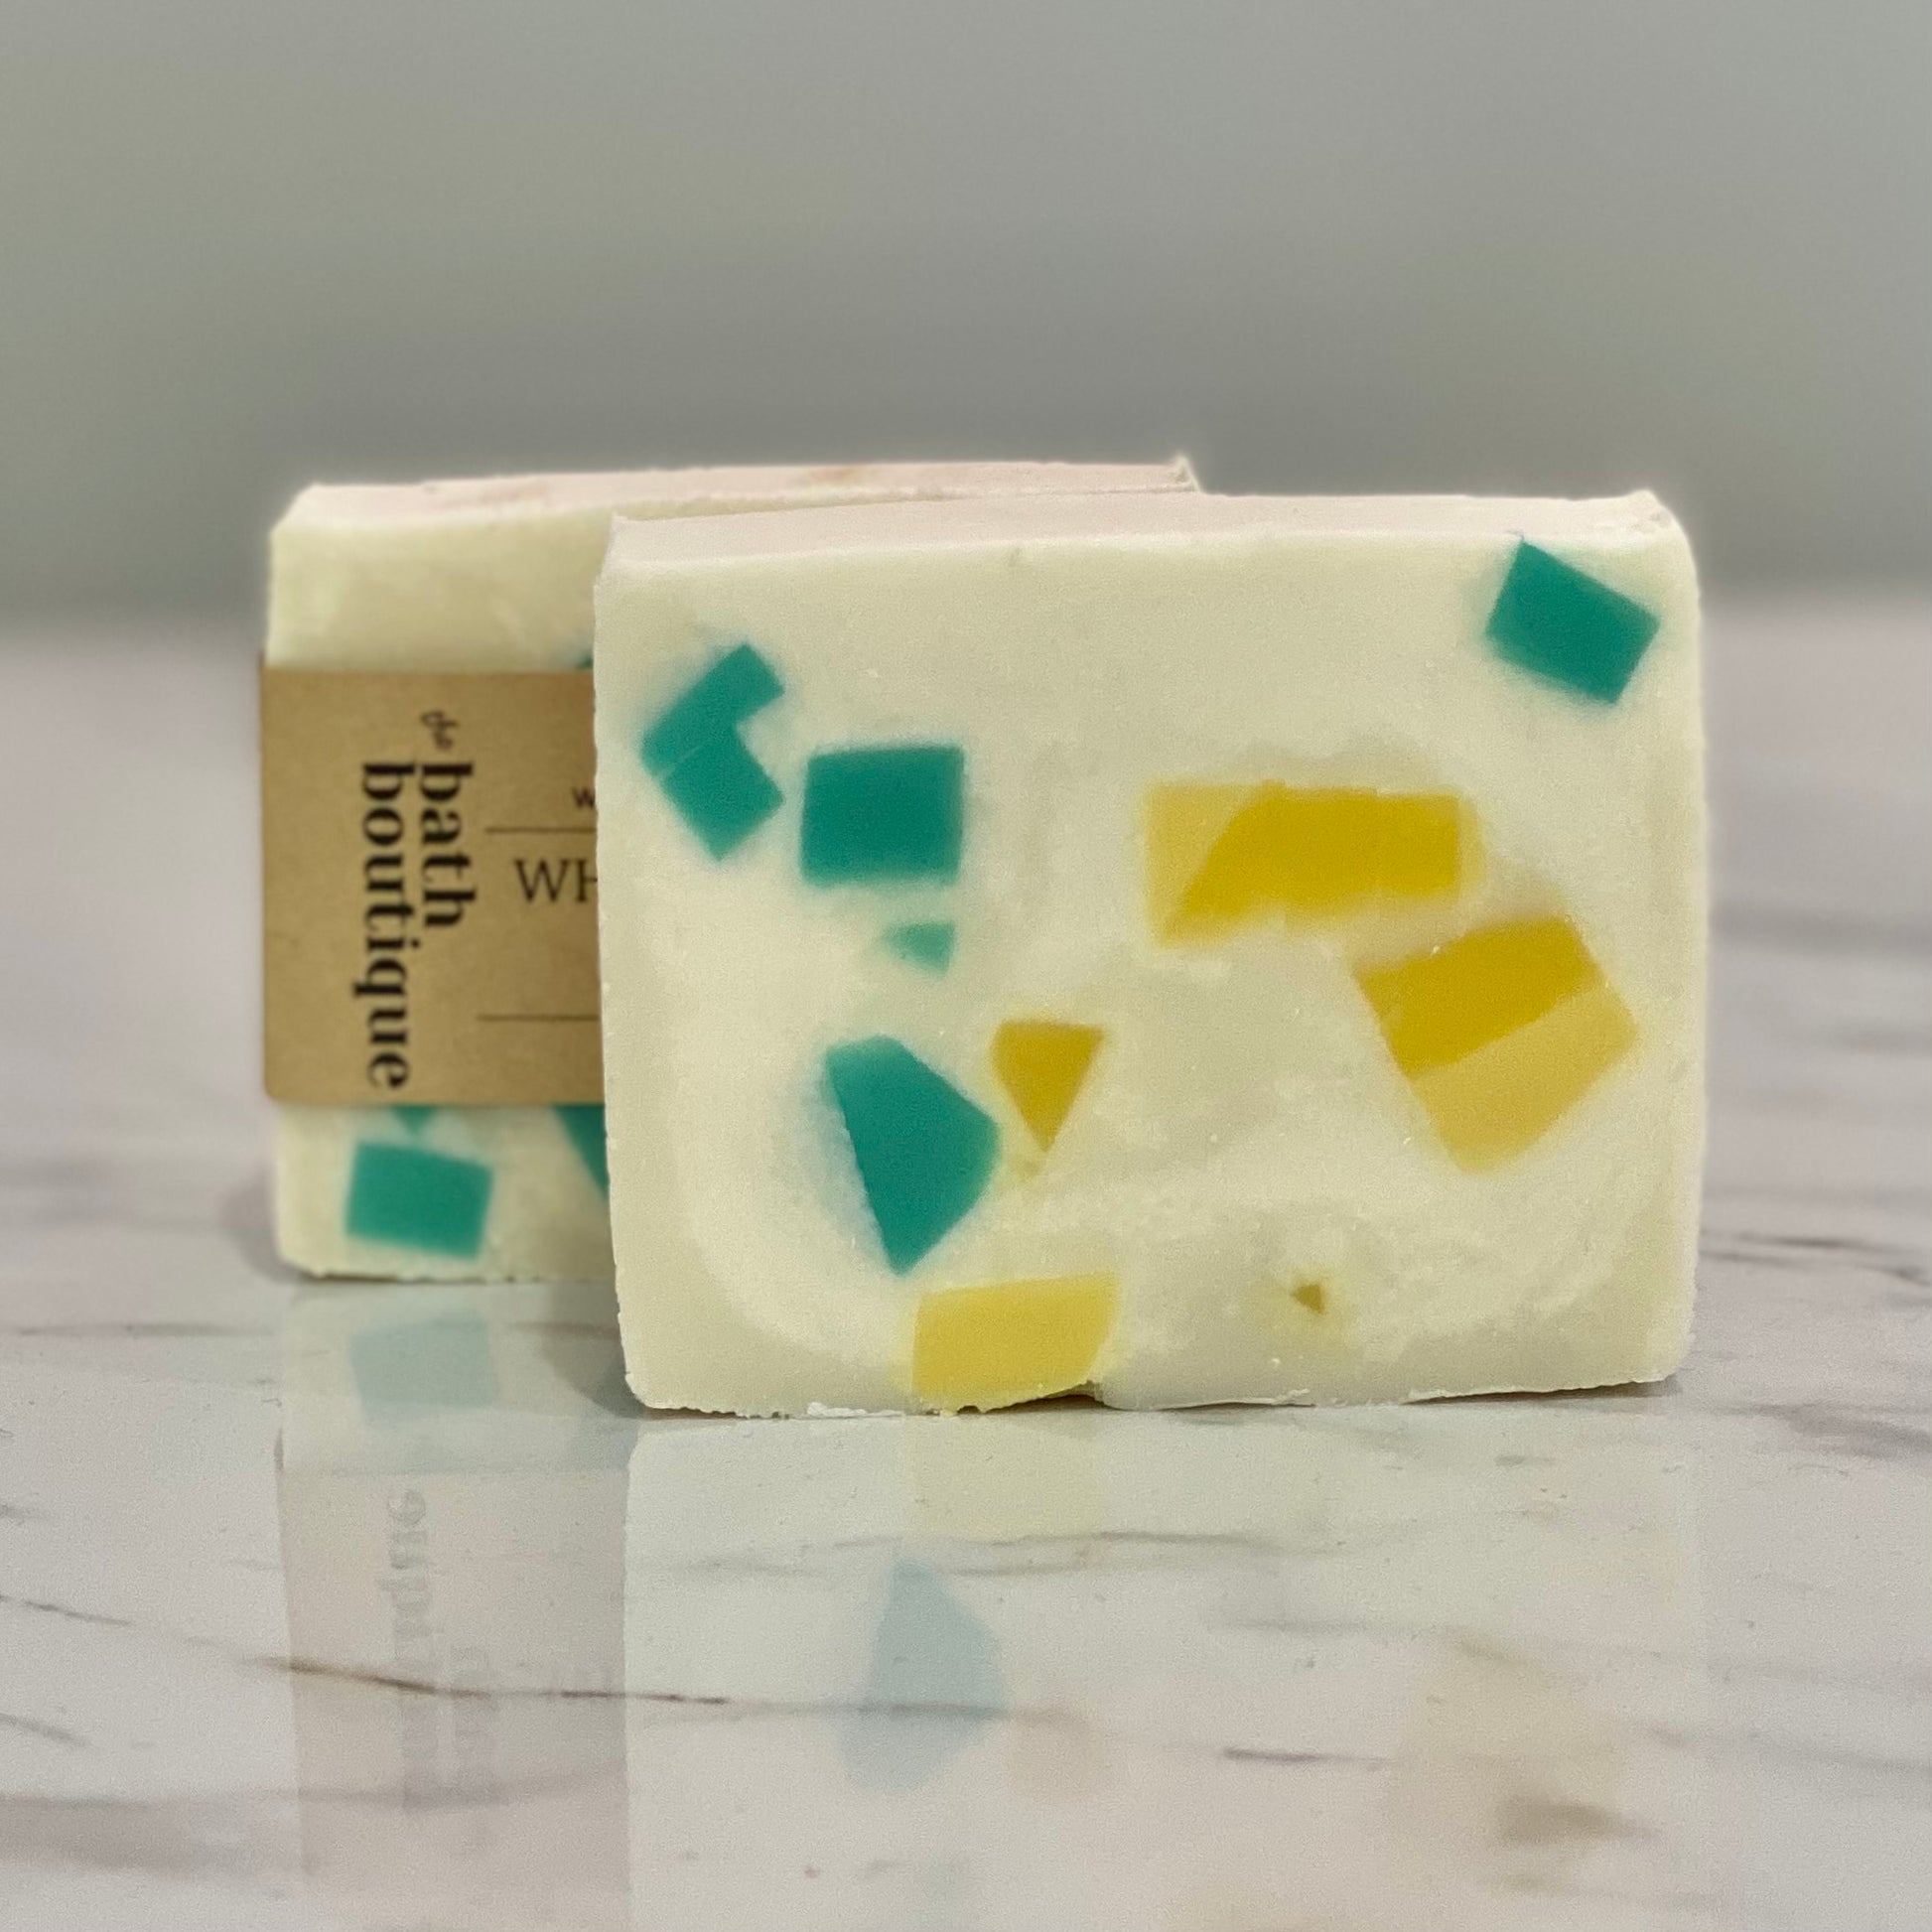 Handcrafted Artisan Soap